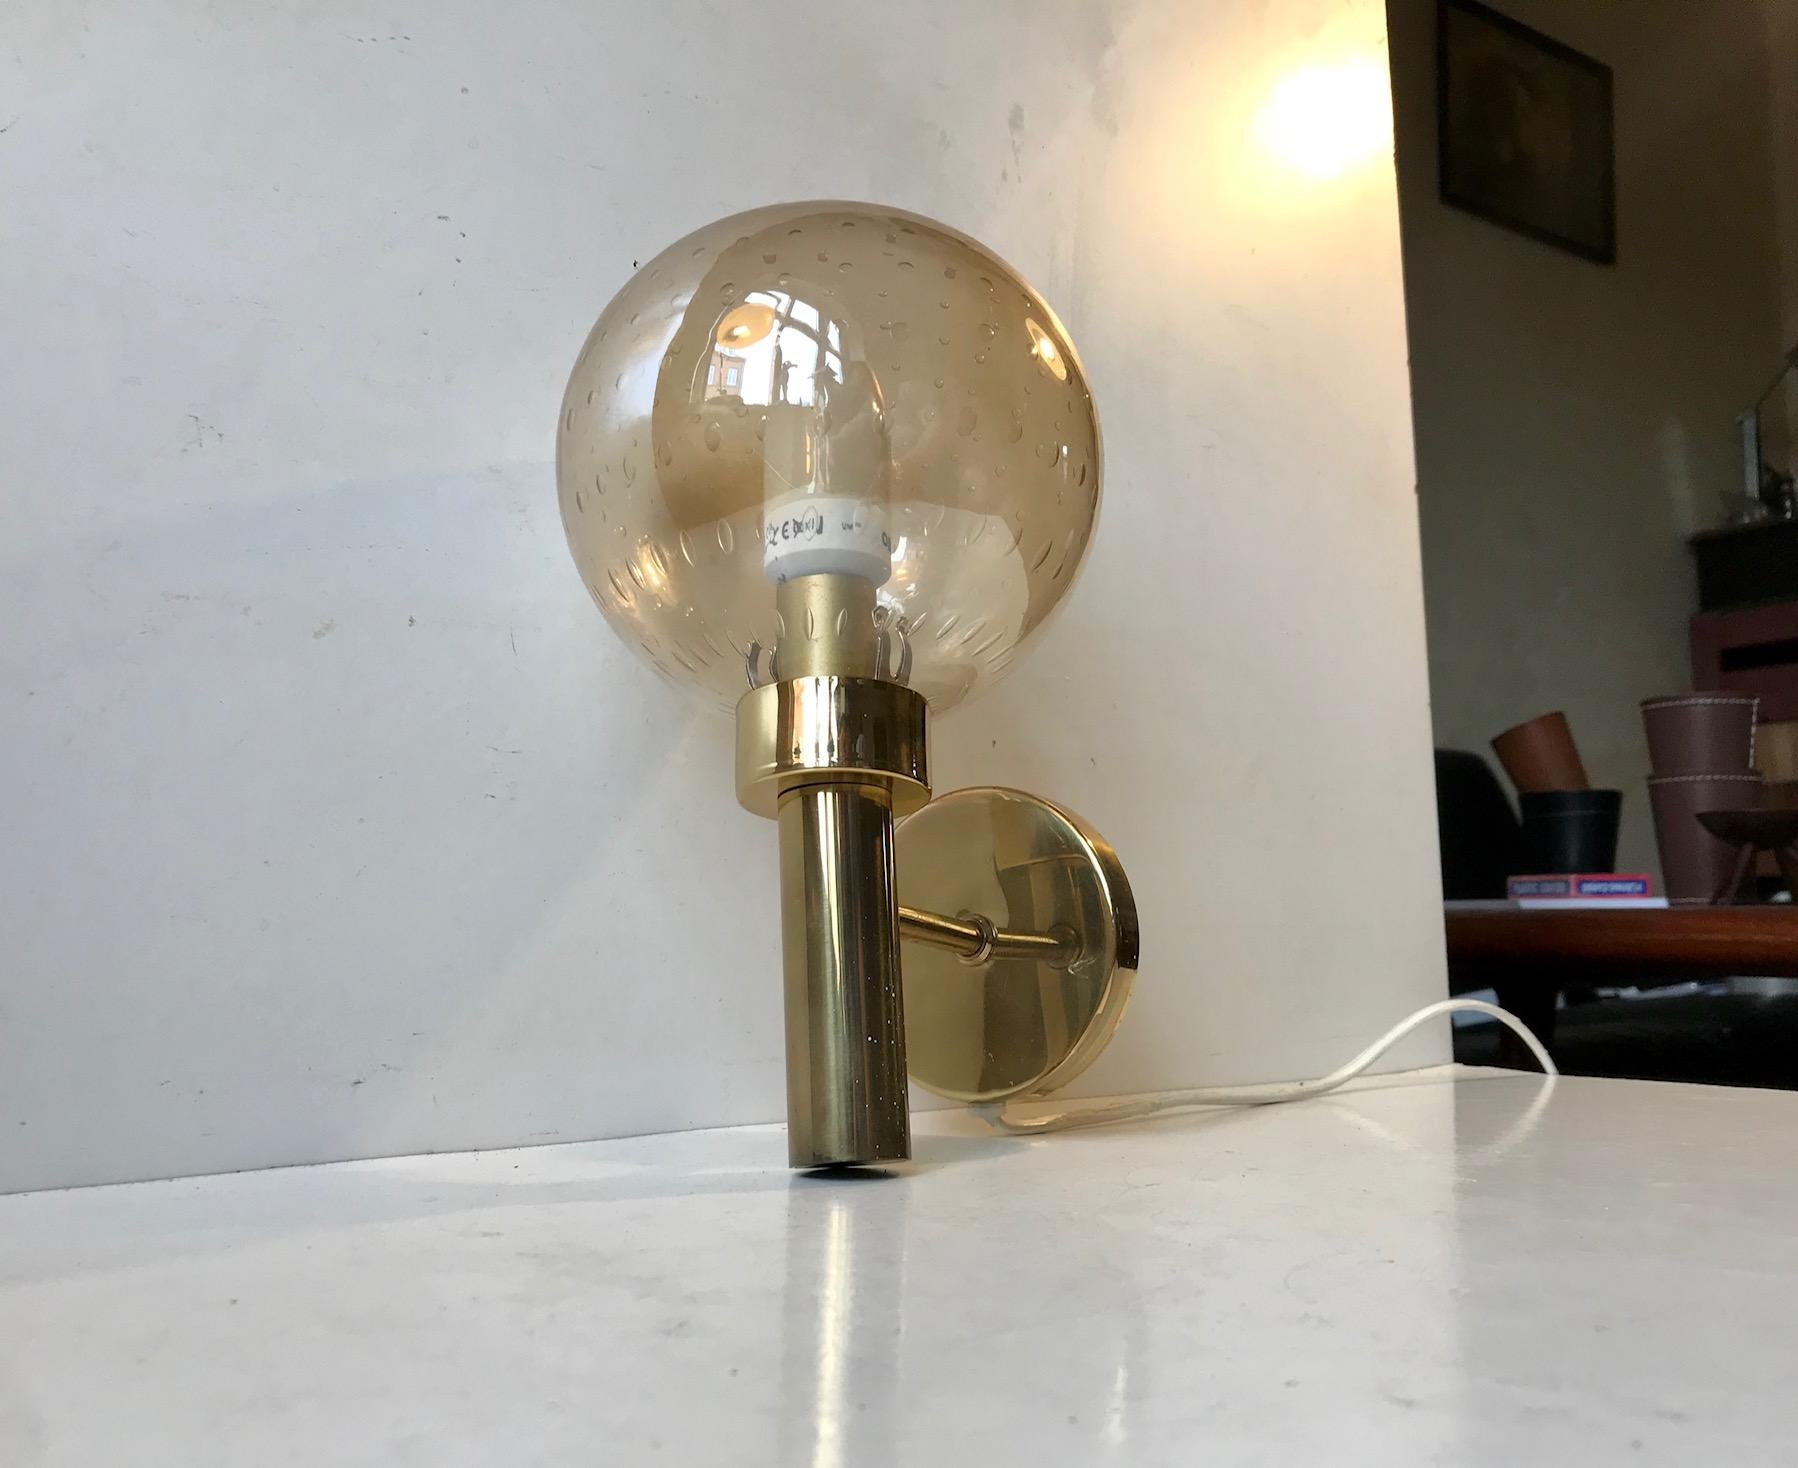 Lounge sconce with spherical honey colored glass shade with controlled bubbles. It was manufactured and designed by Vitrika in Denmark in a style reminiscent of Hans-Agne Jakobsson. Nice vintage and working order with a light patina to the brass